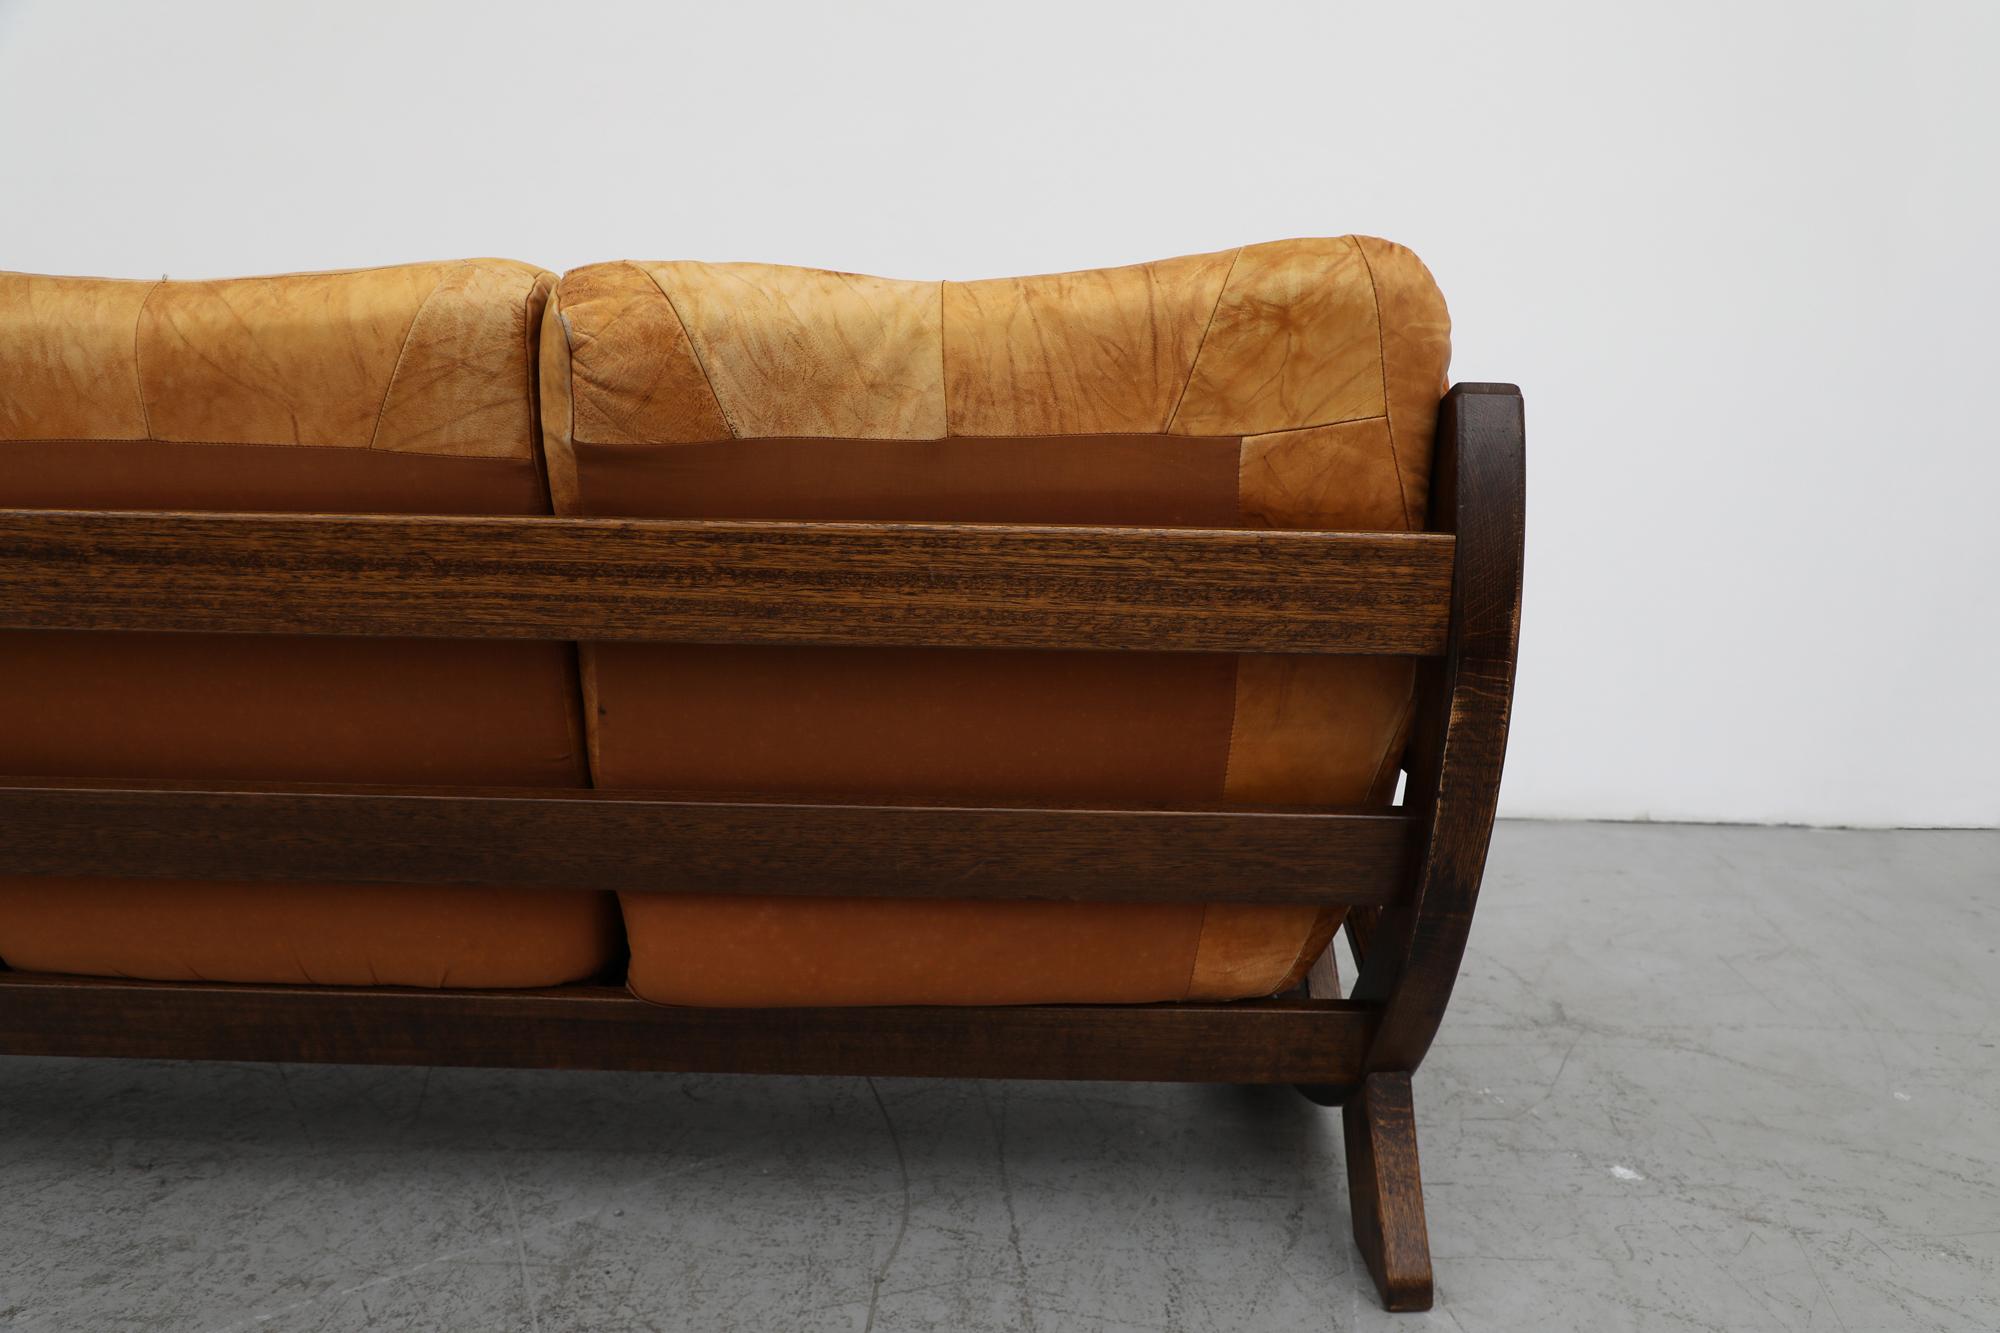 Late 20th Century Mid-Century Brutalist Leather Patchwork Sofa with Bonanza Wood Frame For Sale